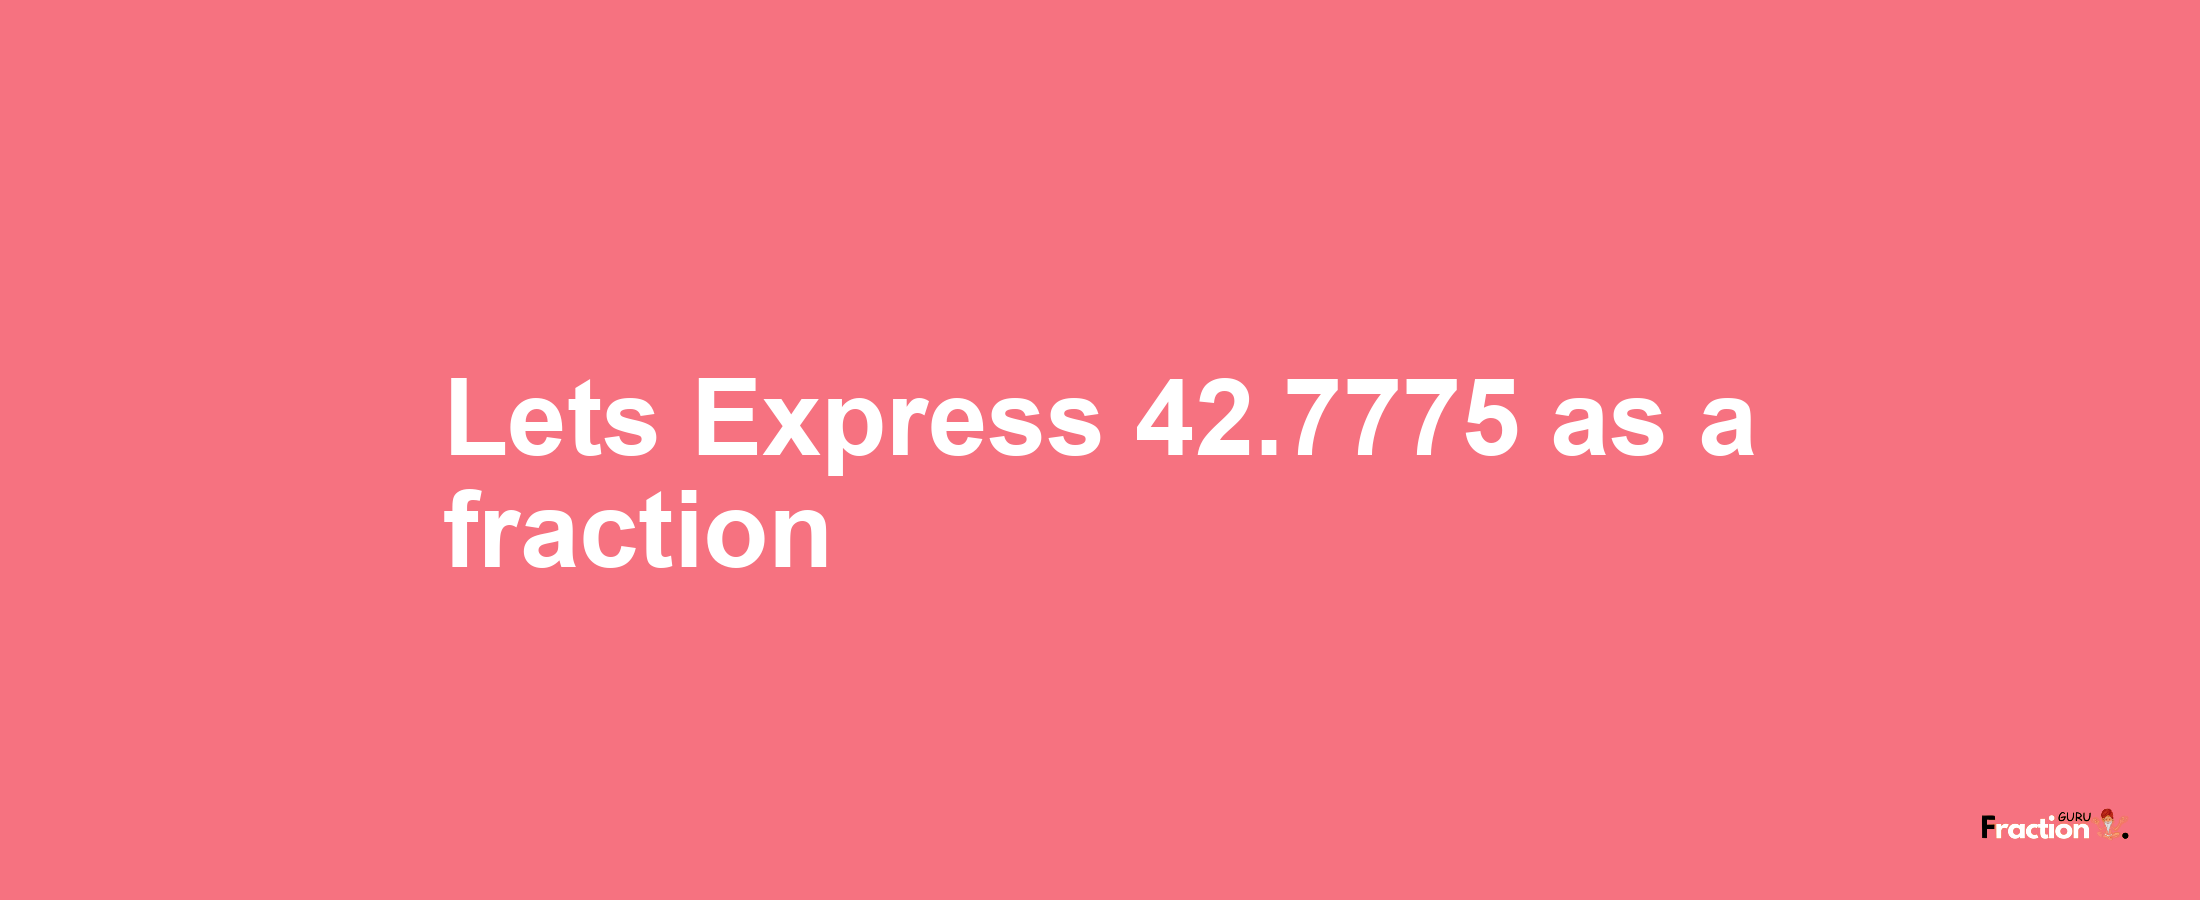 Lets Express 42.7775 as afraction